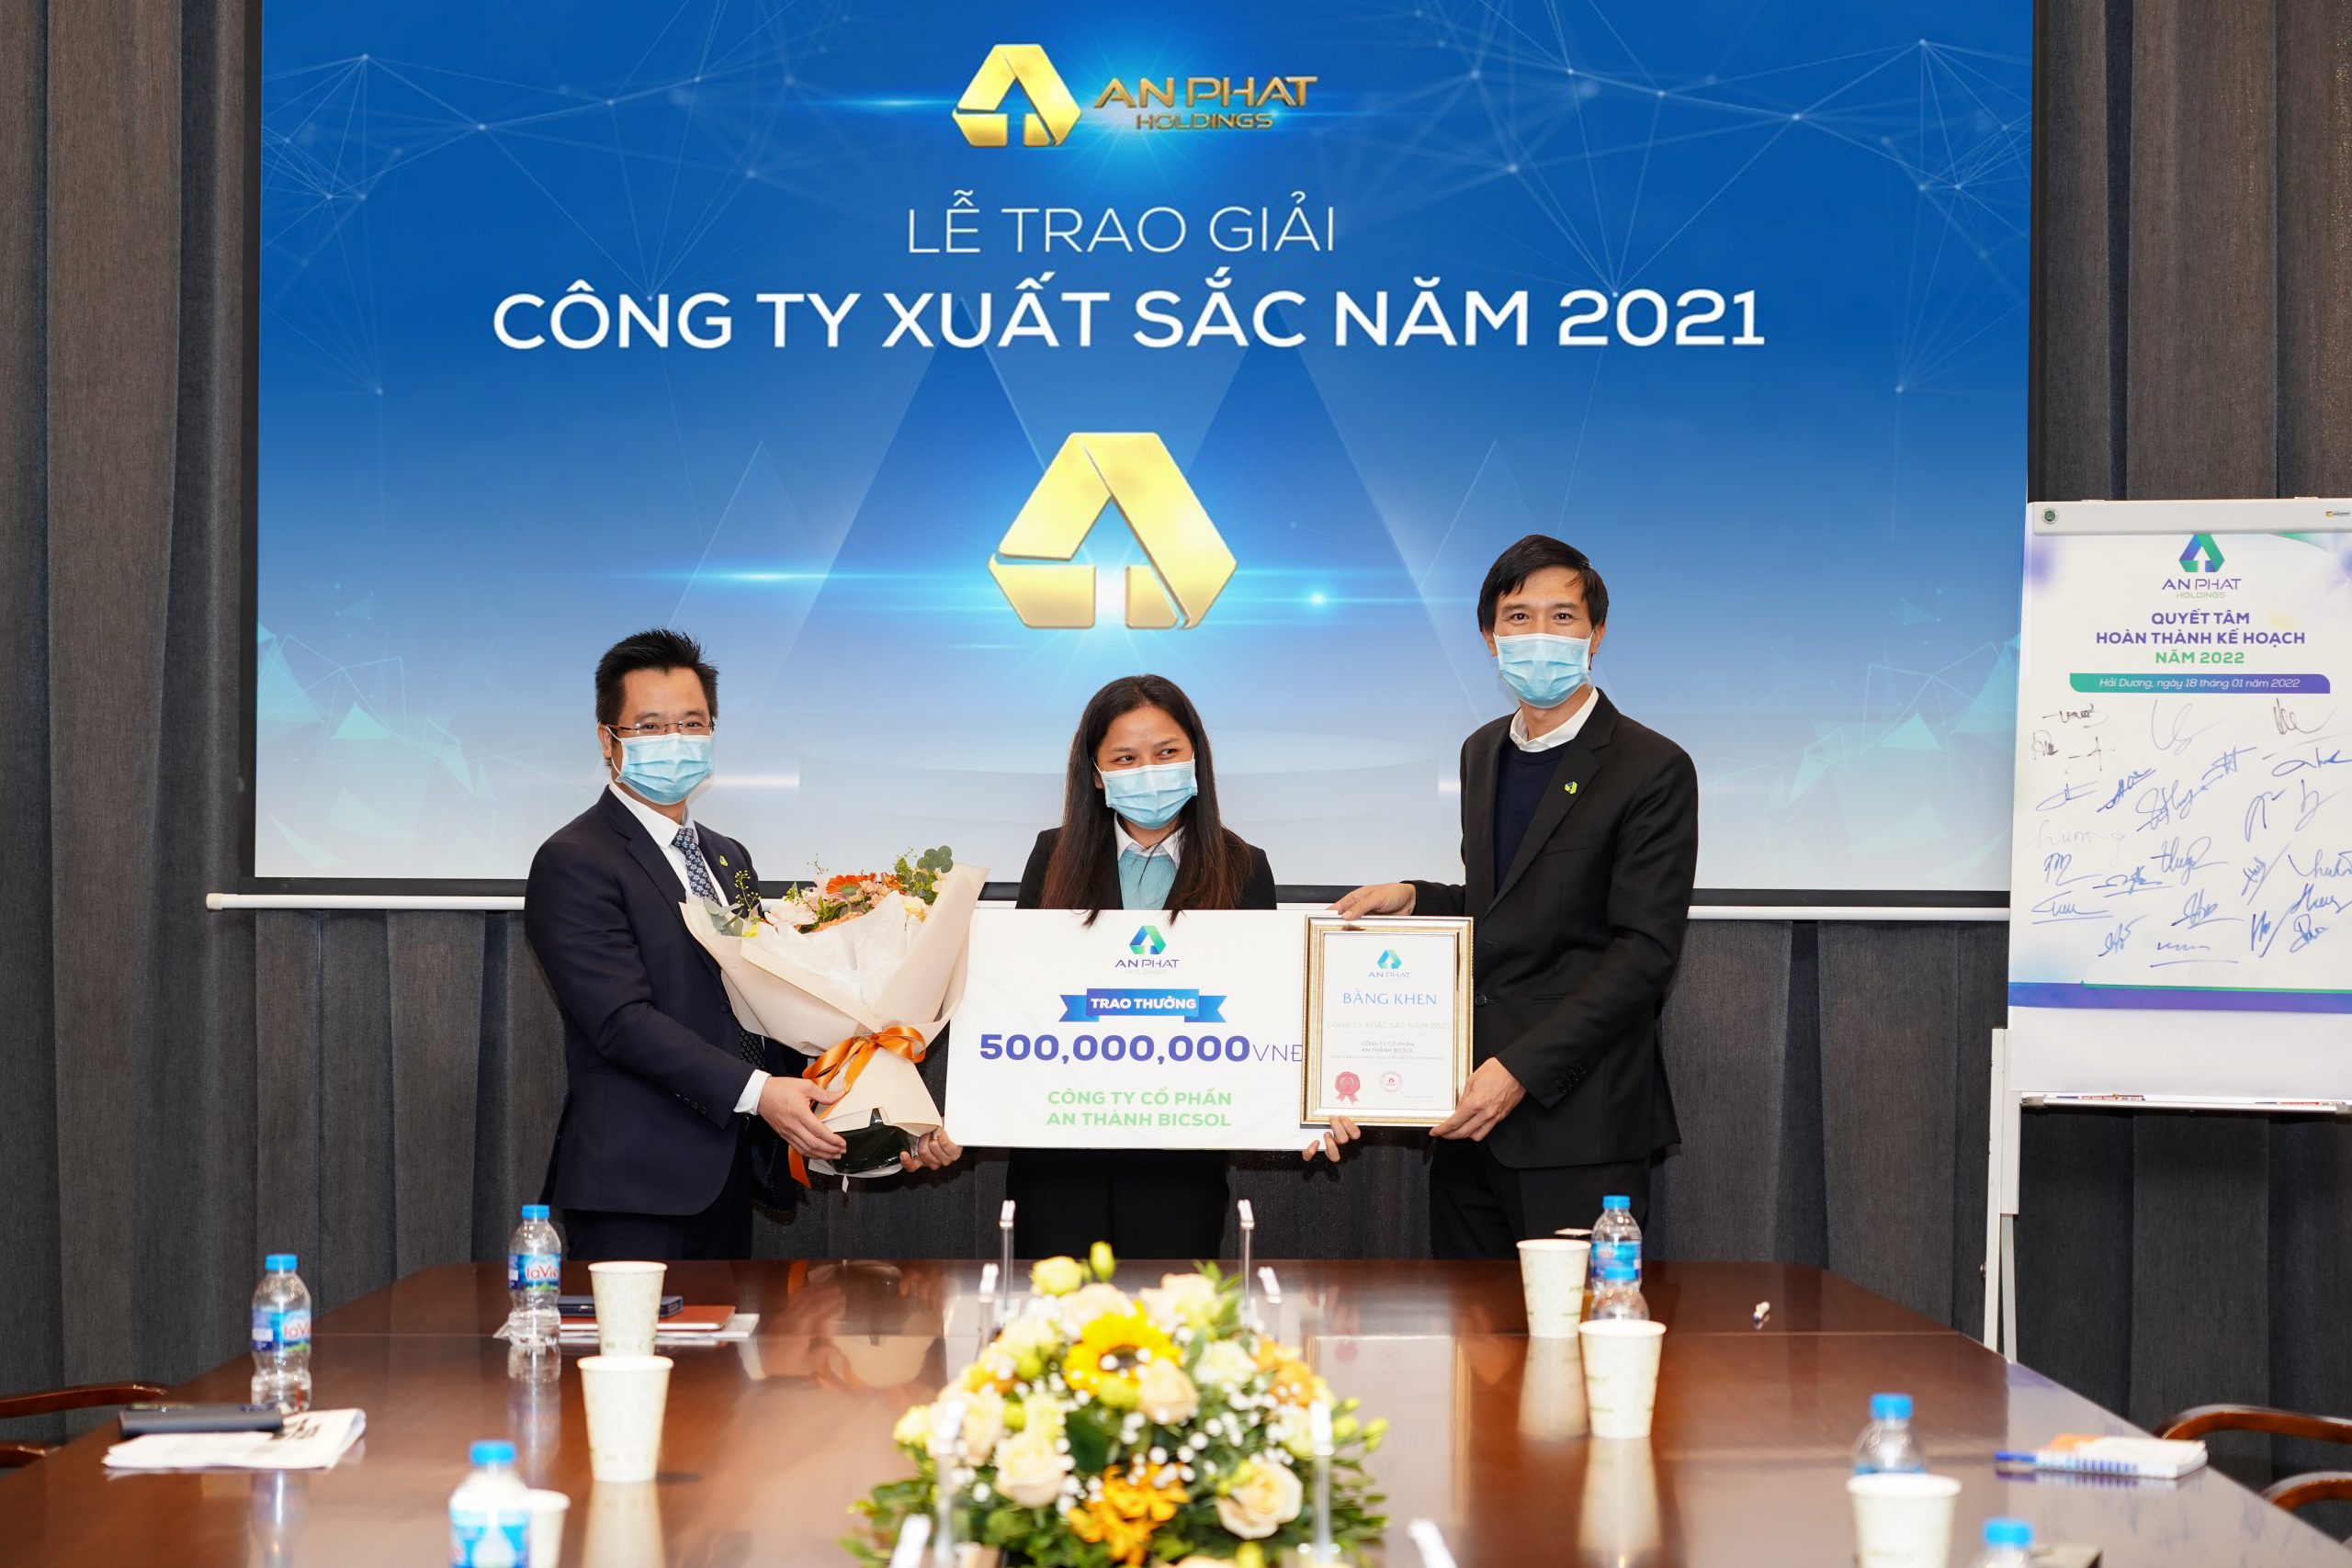 Mr. Nguyen Le Trung - Vice Chairman of An Phat Holdings (right) and Mr. Dinh Xuan Cuong – Vice Chairman, General Director of An Phat Holdings (left) gave flower and presented awards to An Thanh Bicsol – the best subsidiary in business activities in 2021